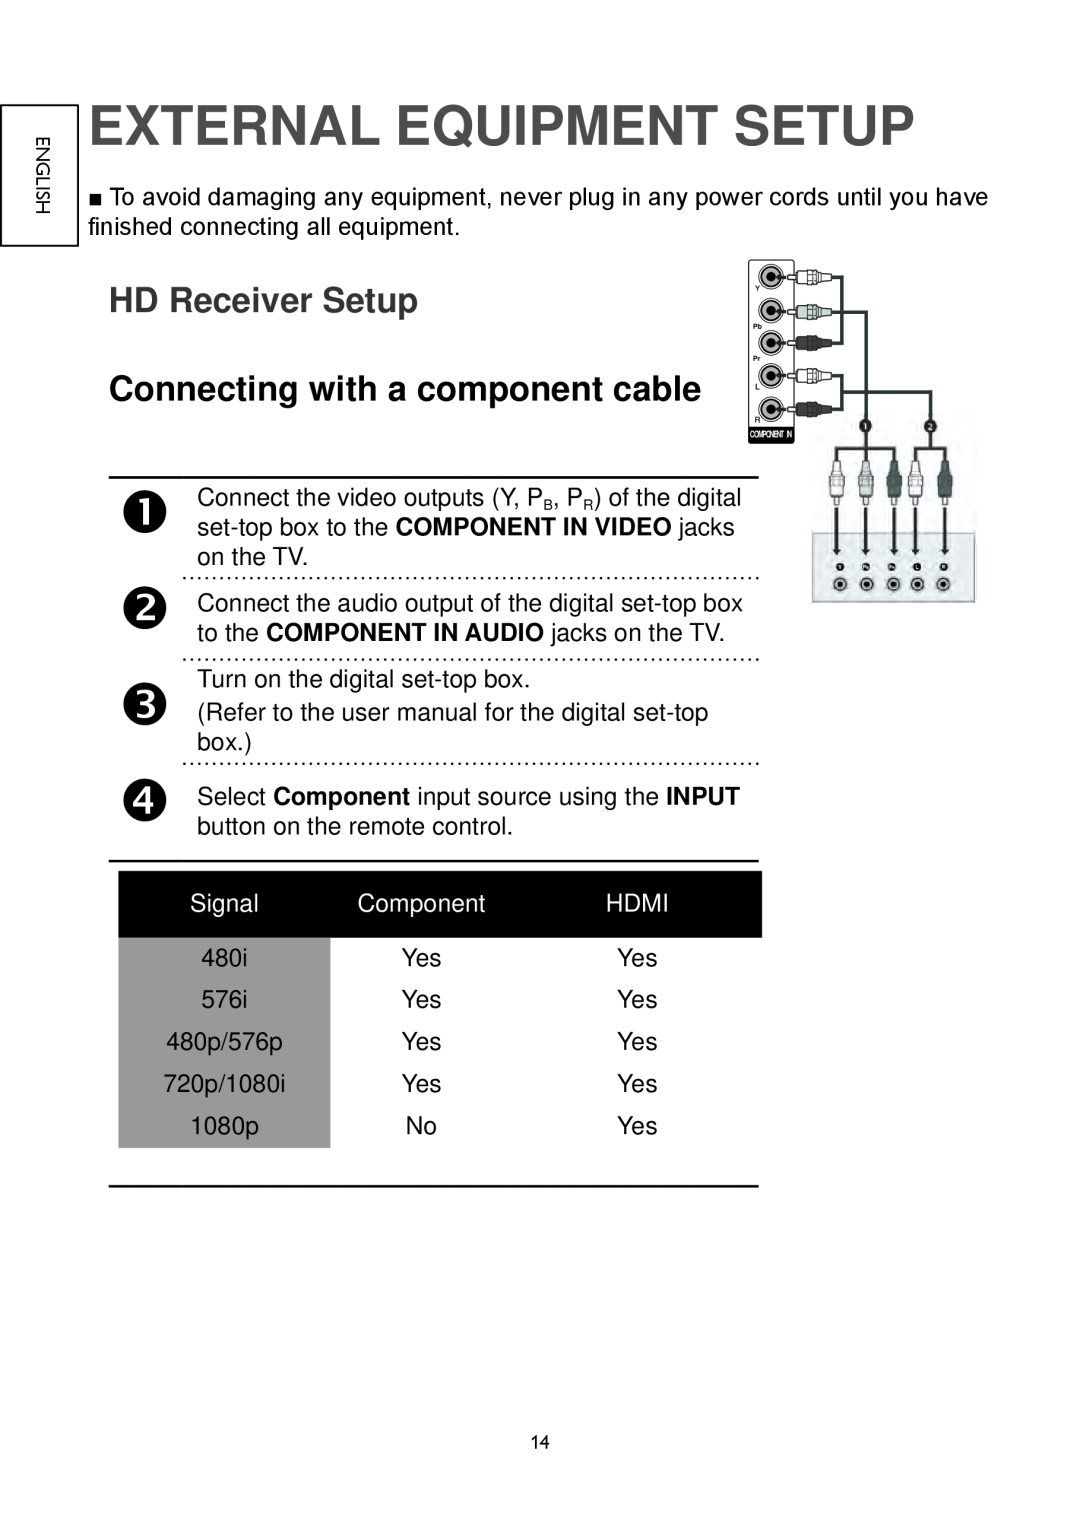 Hitachi 22LD4550C External Equipment Setup, HD Receiver Setup, Connecting with a component cable, Signal, Component, Hdmi 